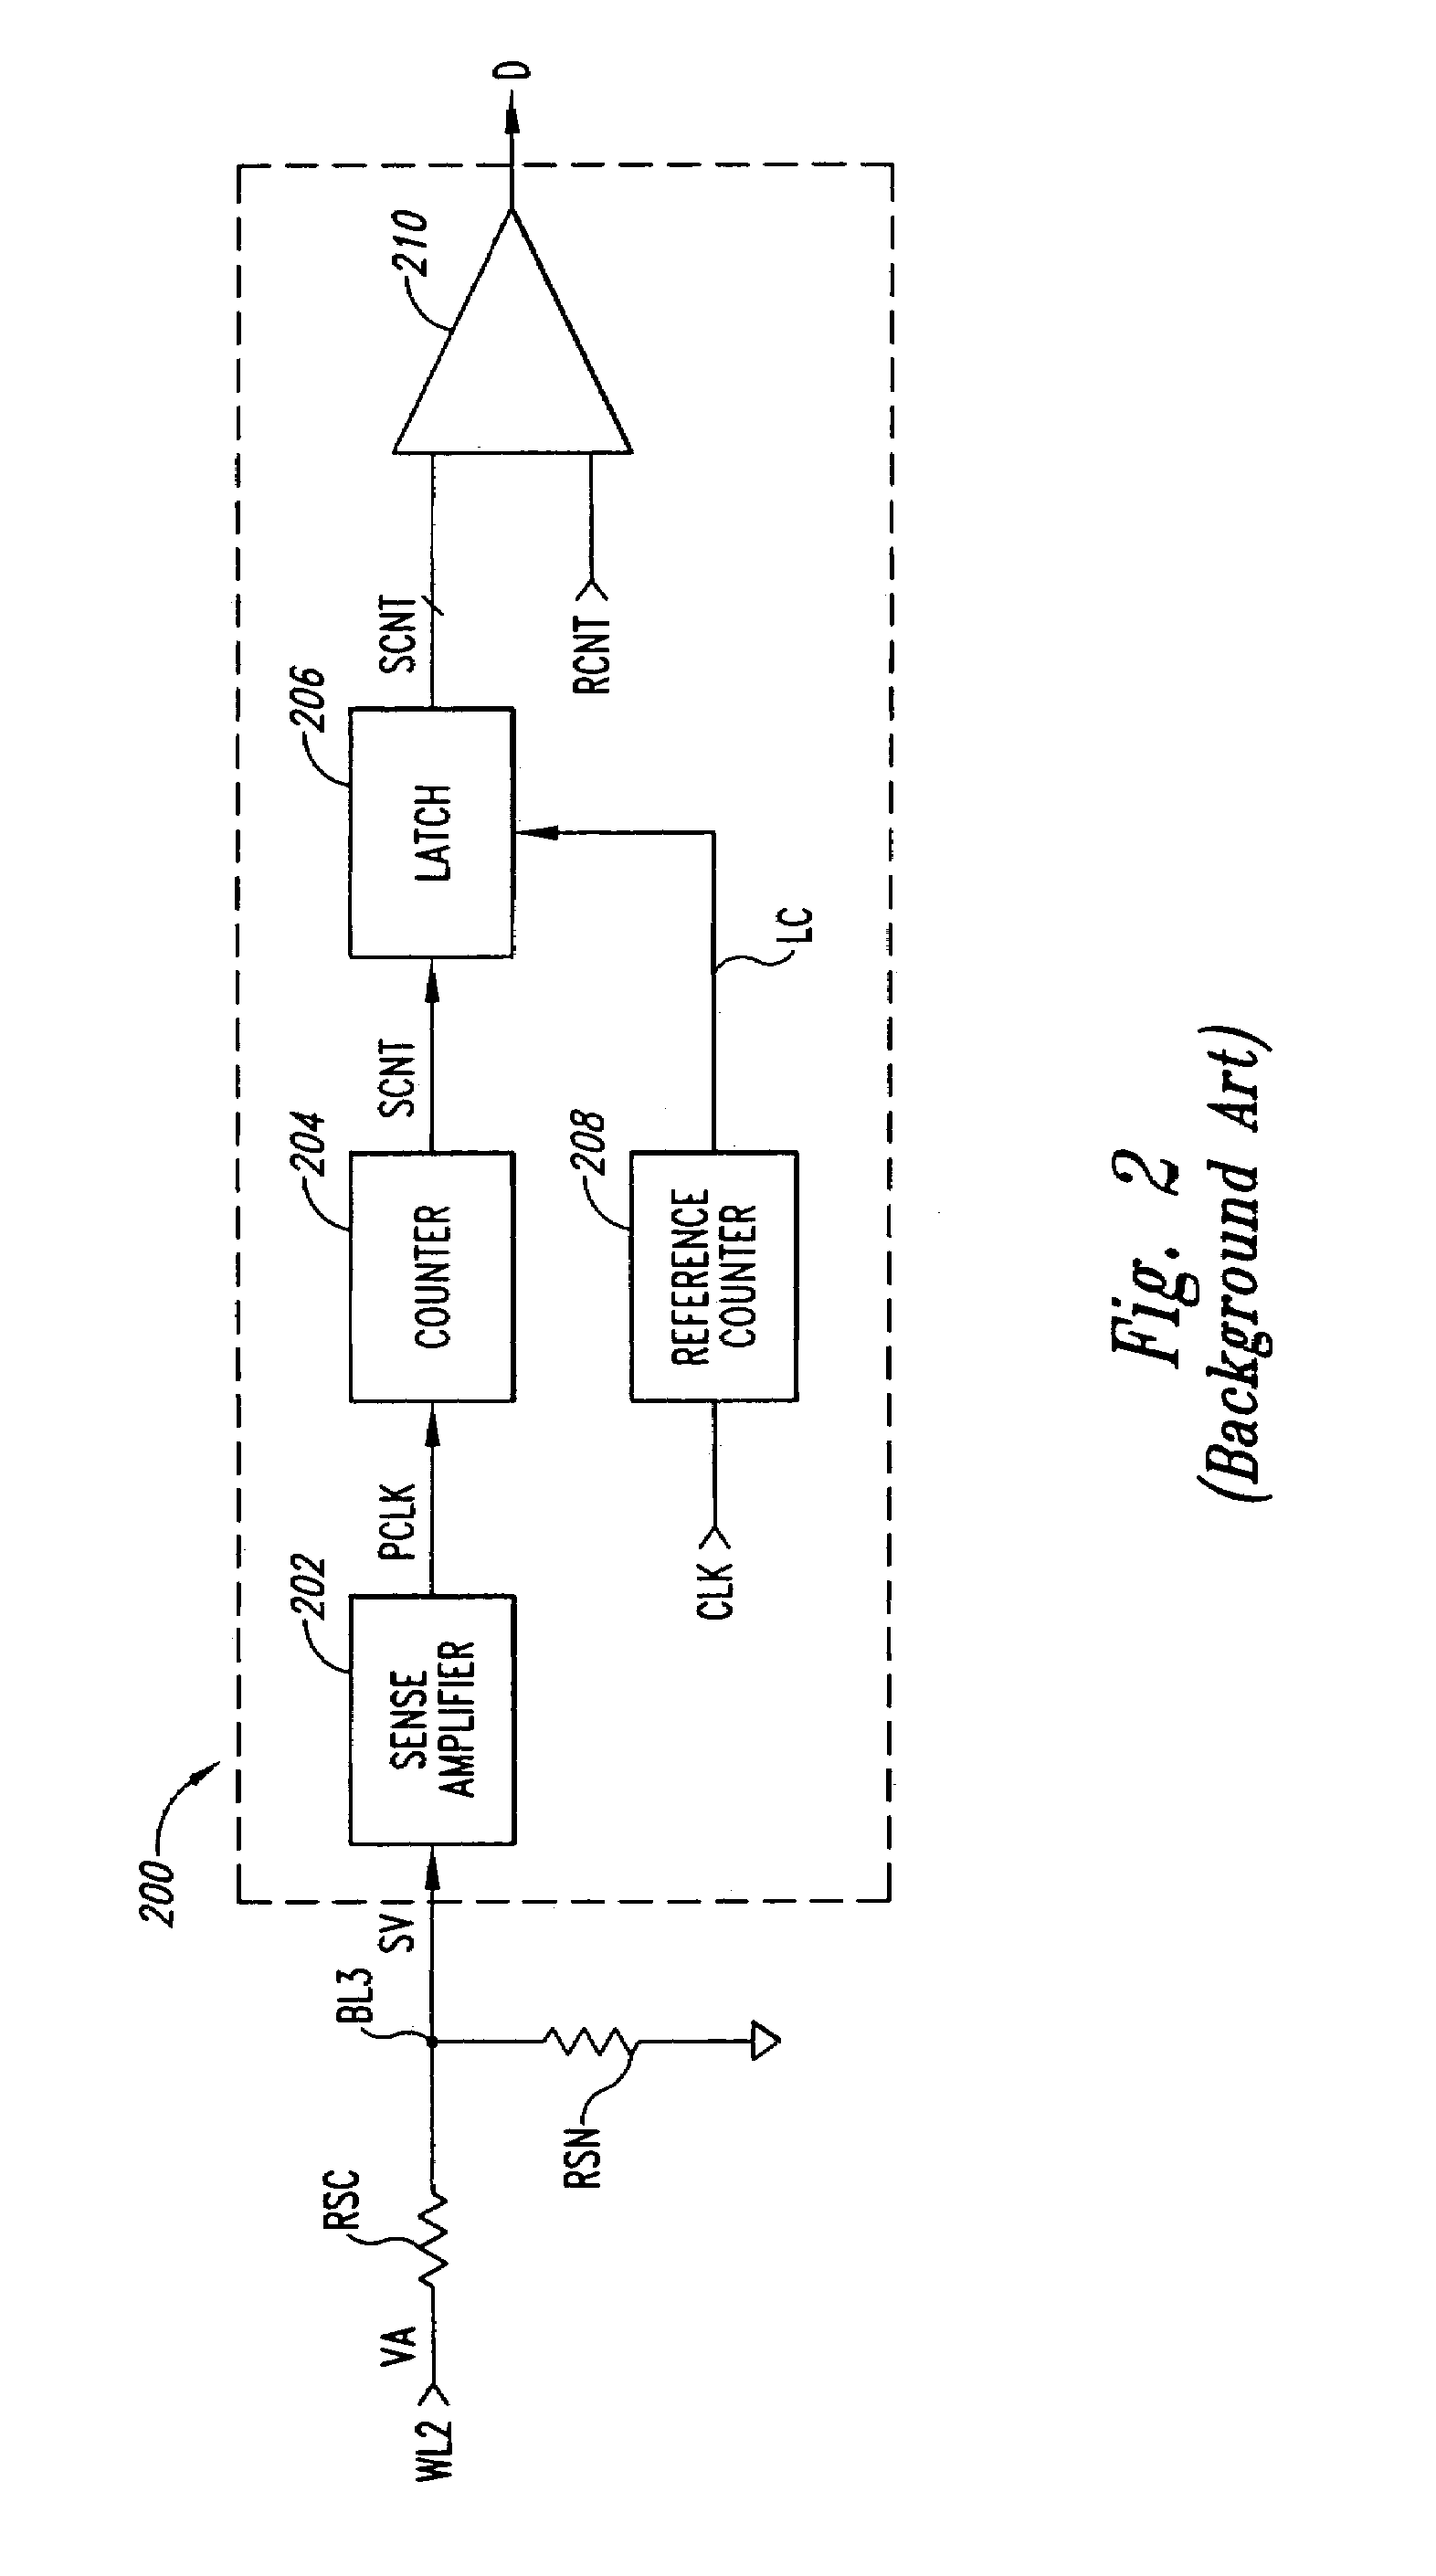 System and method for sensing data stored in a resistive memory element using one bit of a digital count